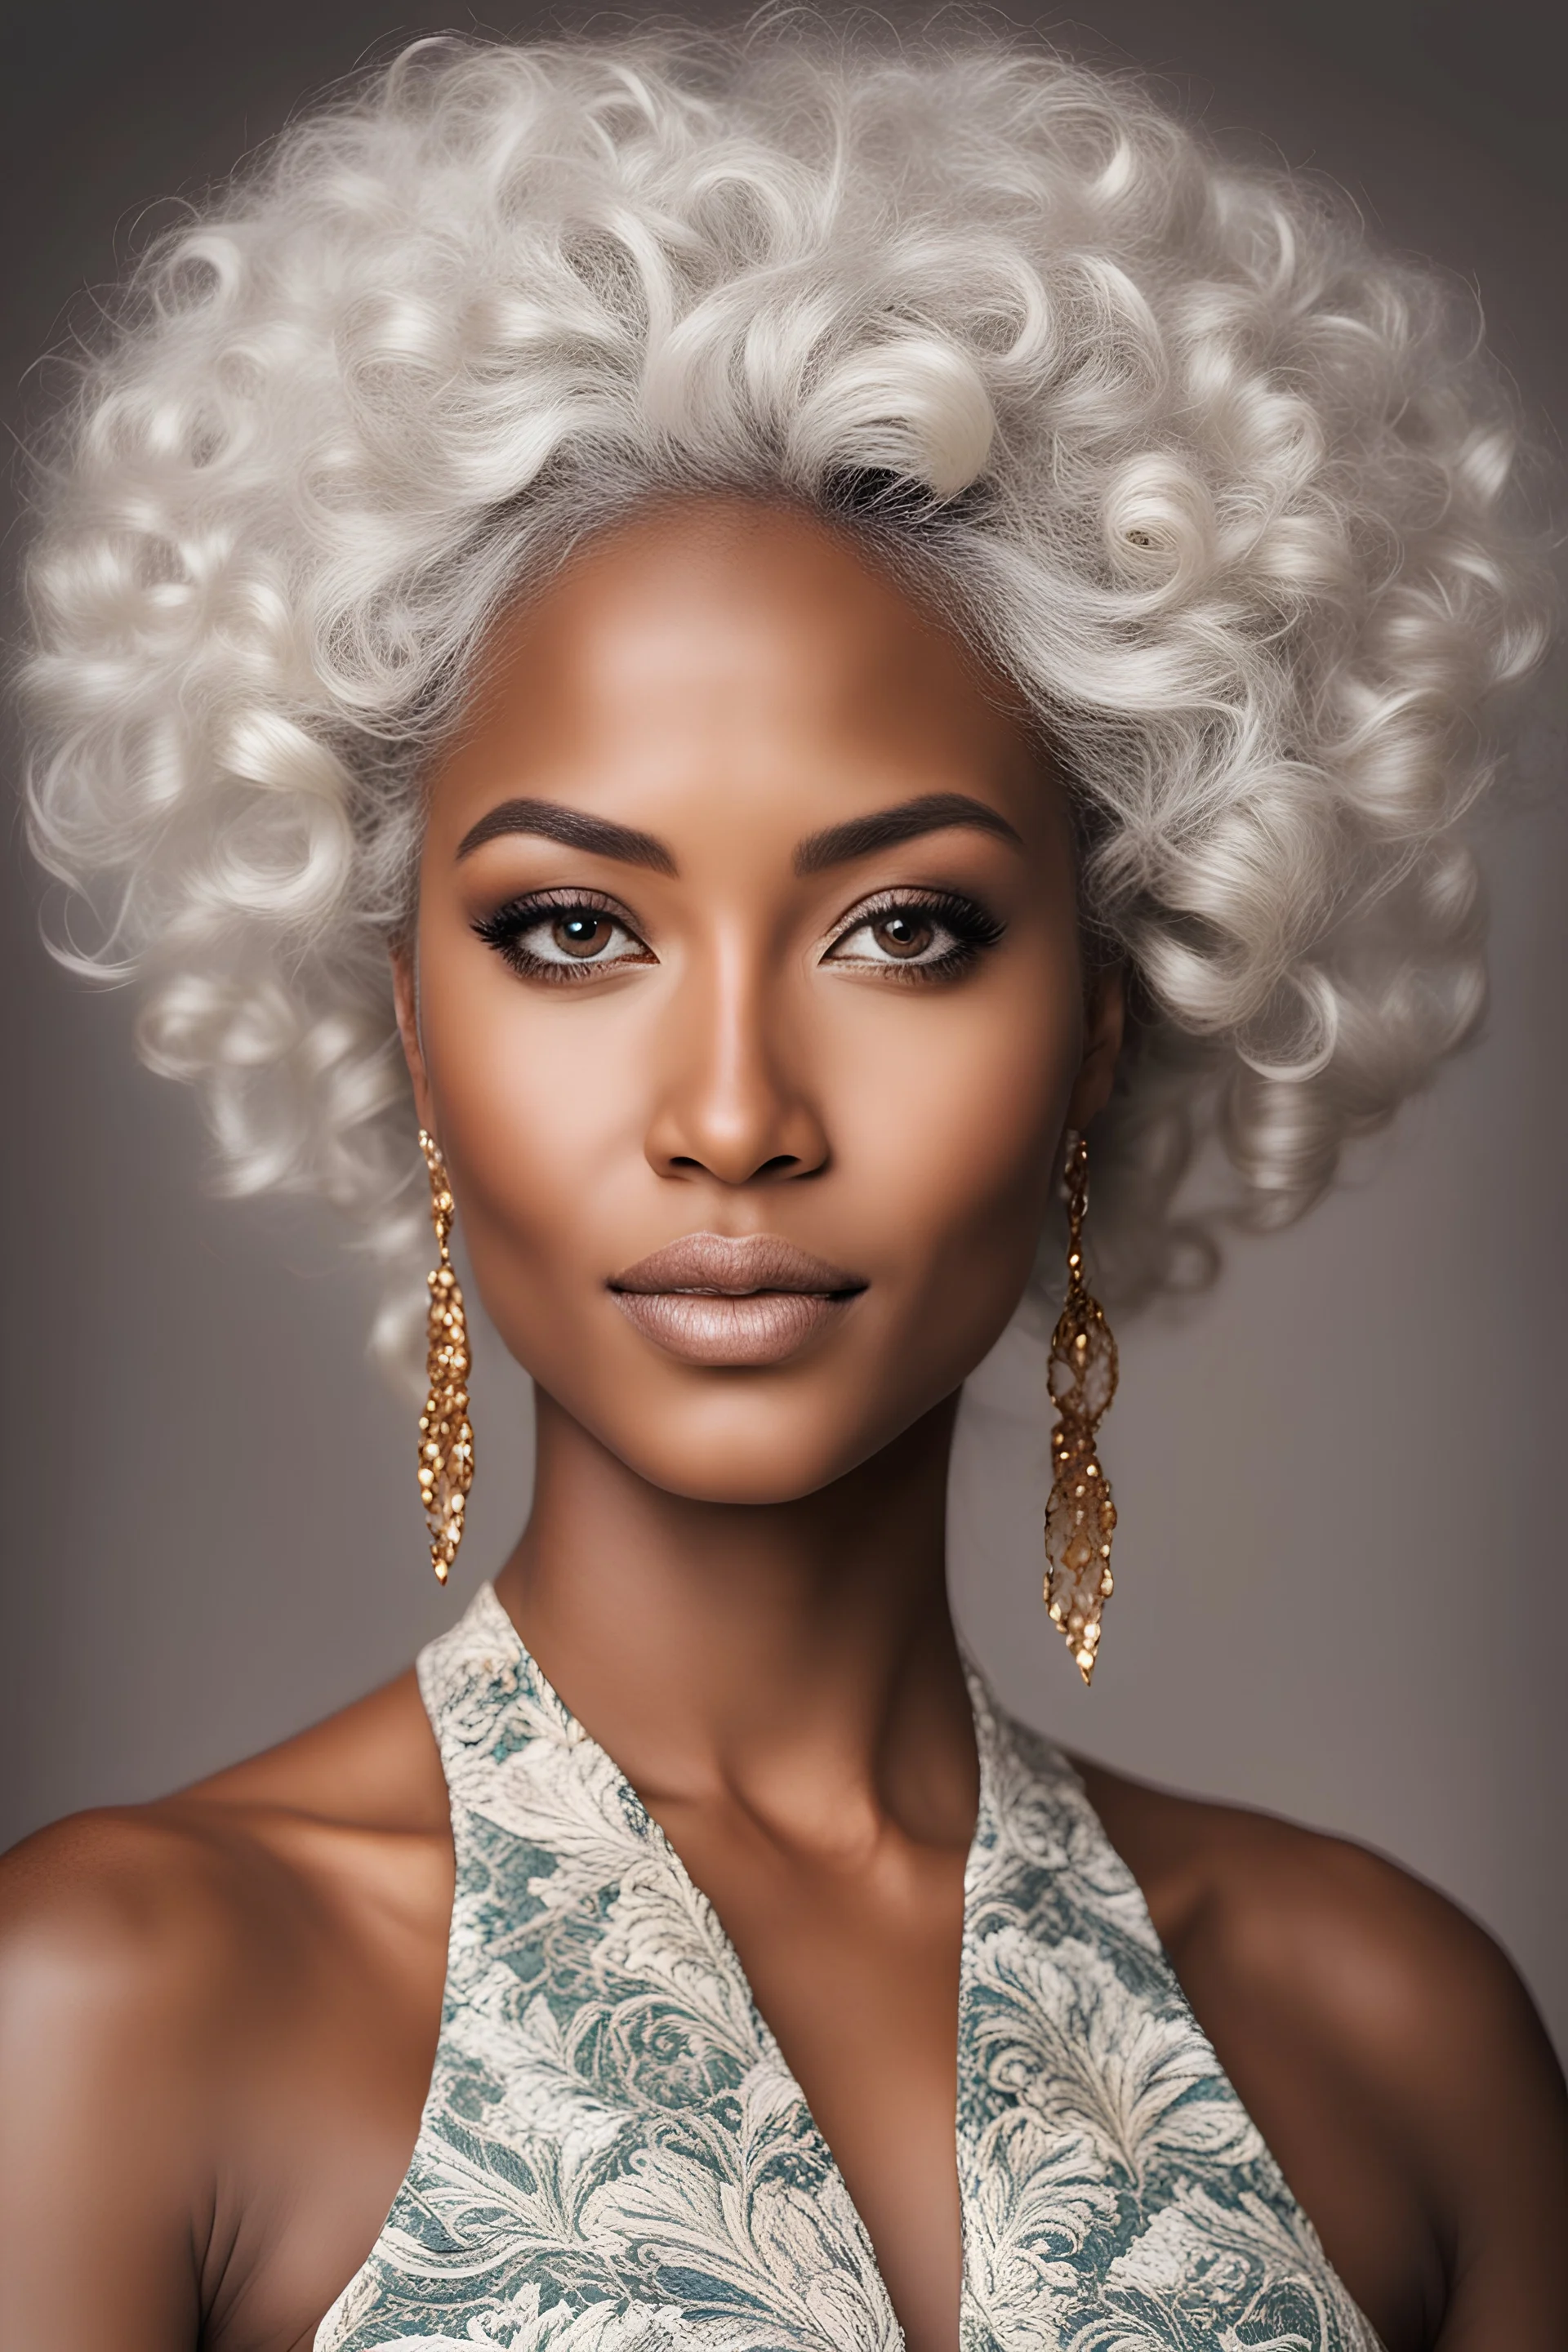 frontal portrait of beautiful woman with prominent cheekbones, rounder face exotic look, 28 years young with caramel skin tone, white hair and grey eyes, Brazil, Simone missick Taveeta Szymanowicz